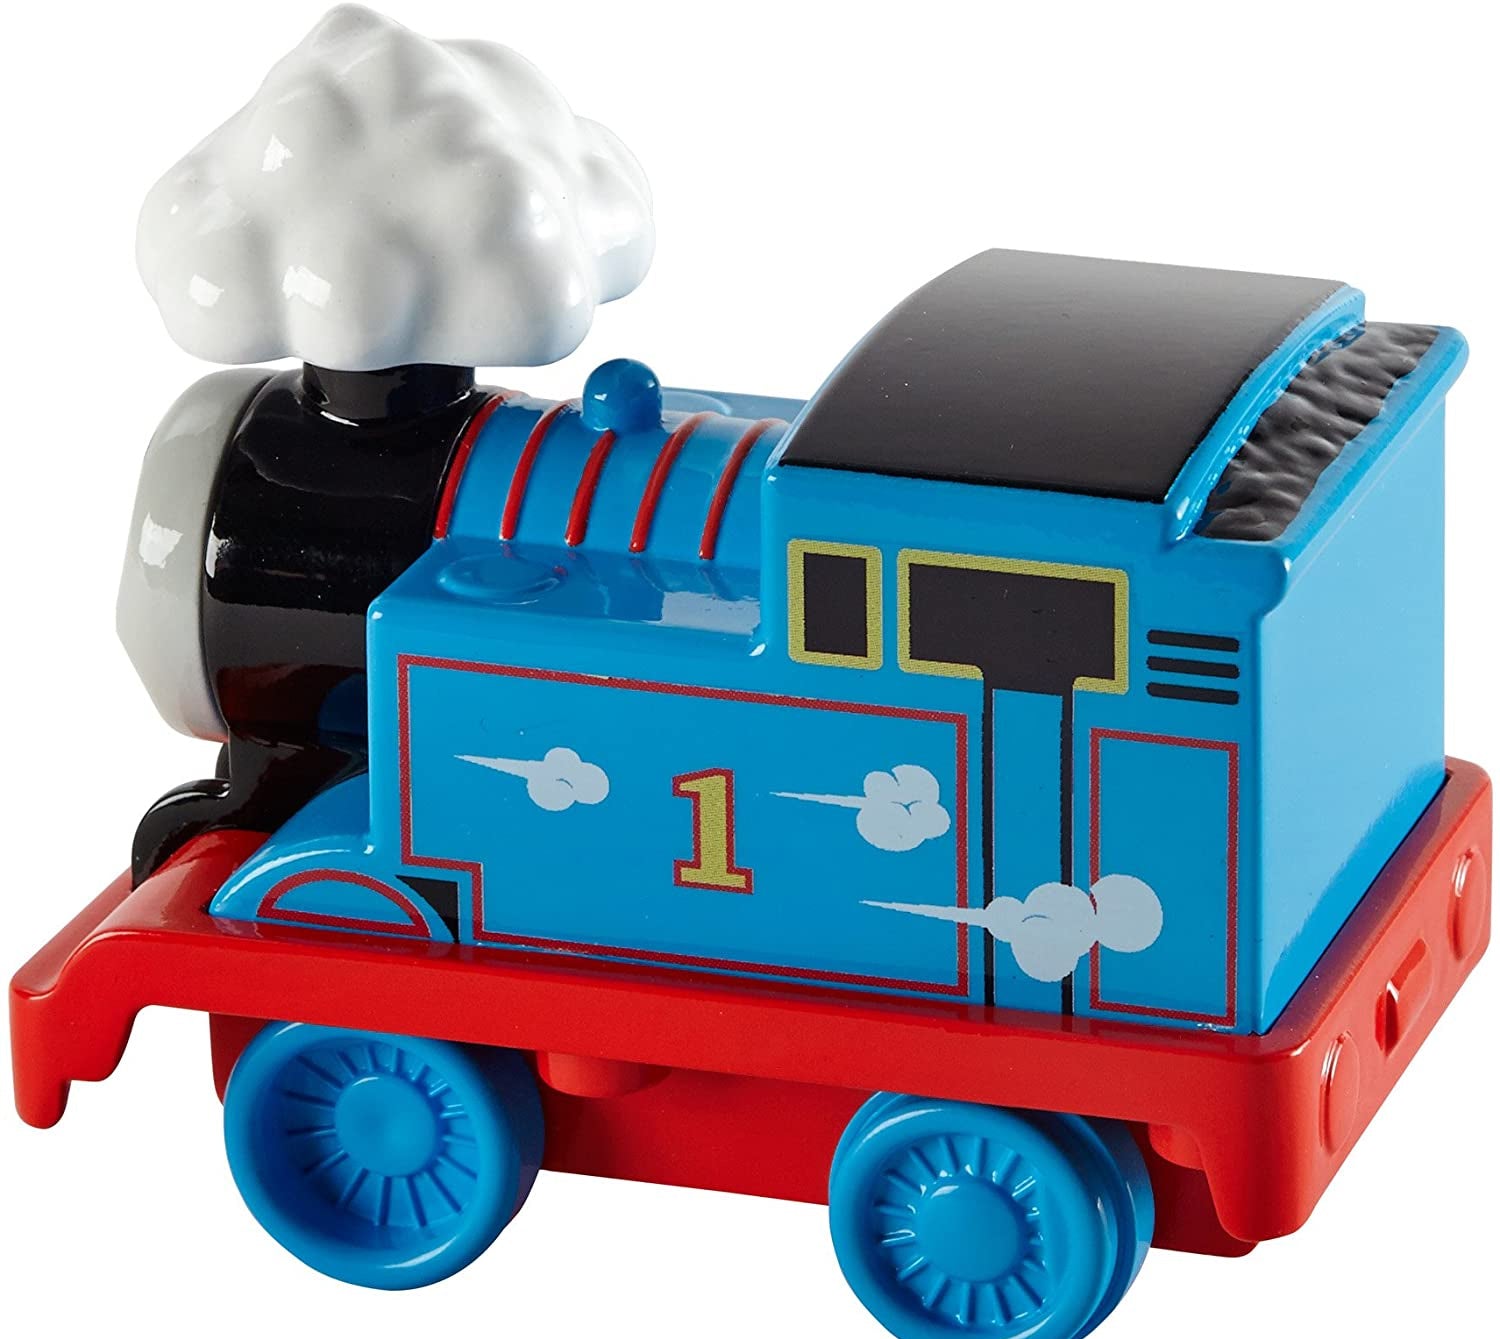 Thomas & Friends Fisher-Price My First Pullback Puffer